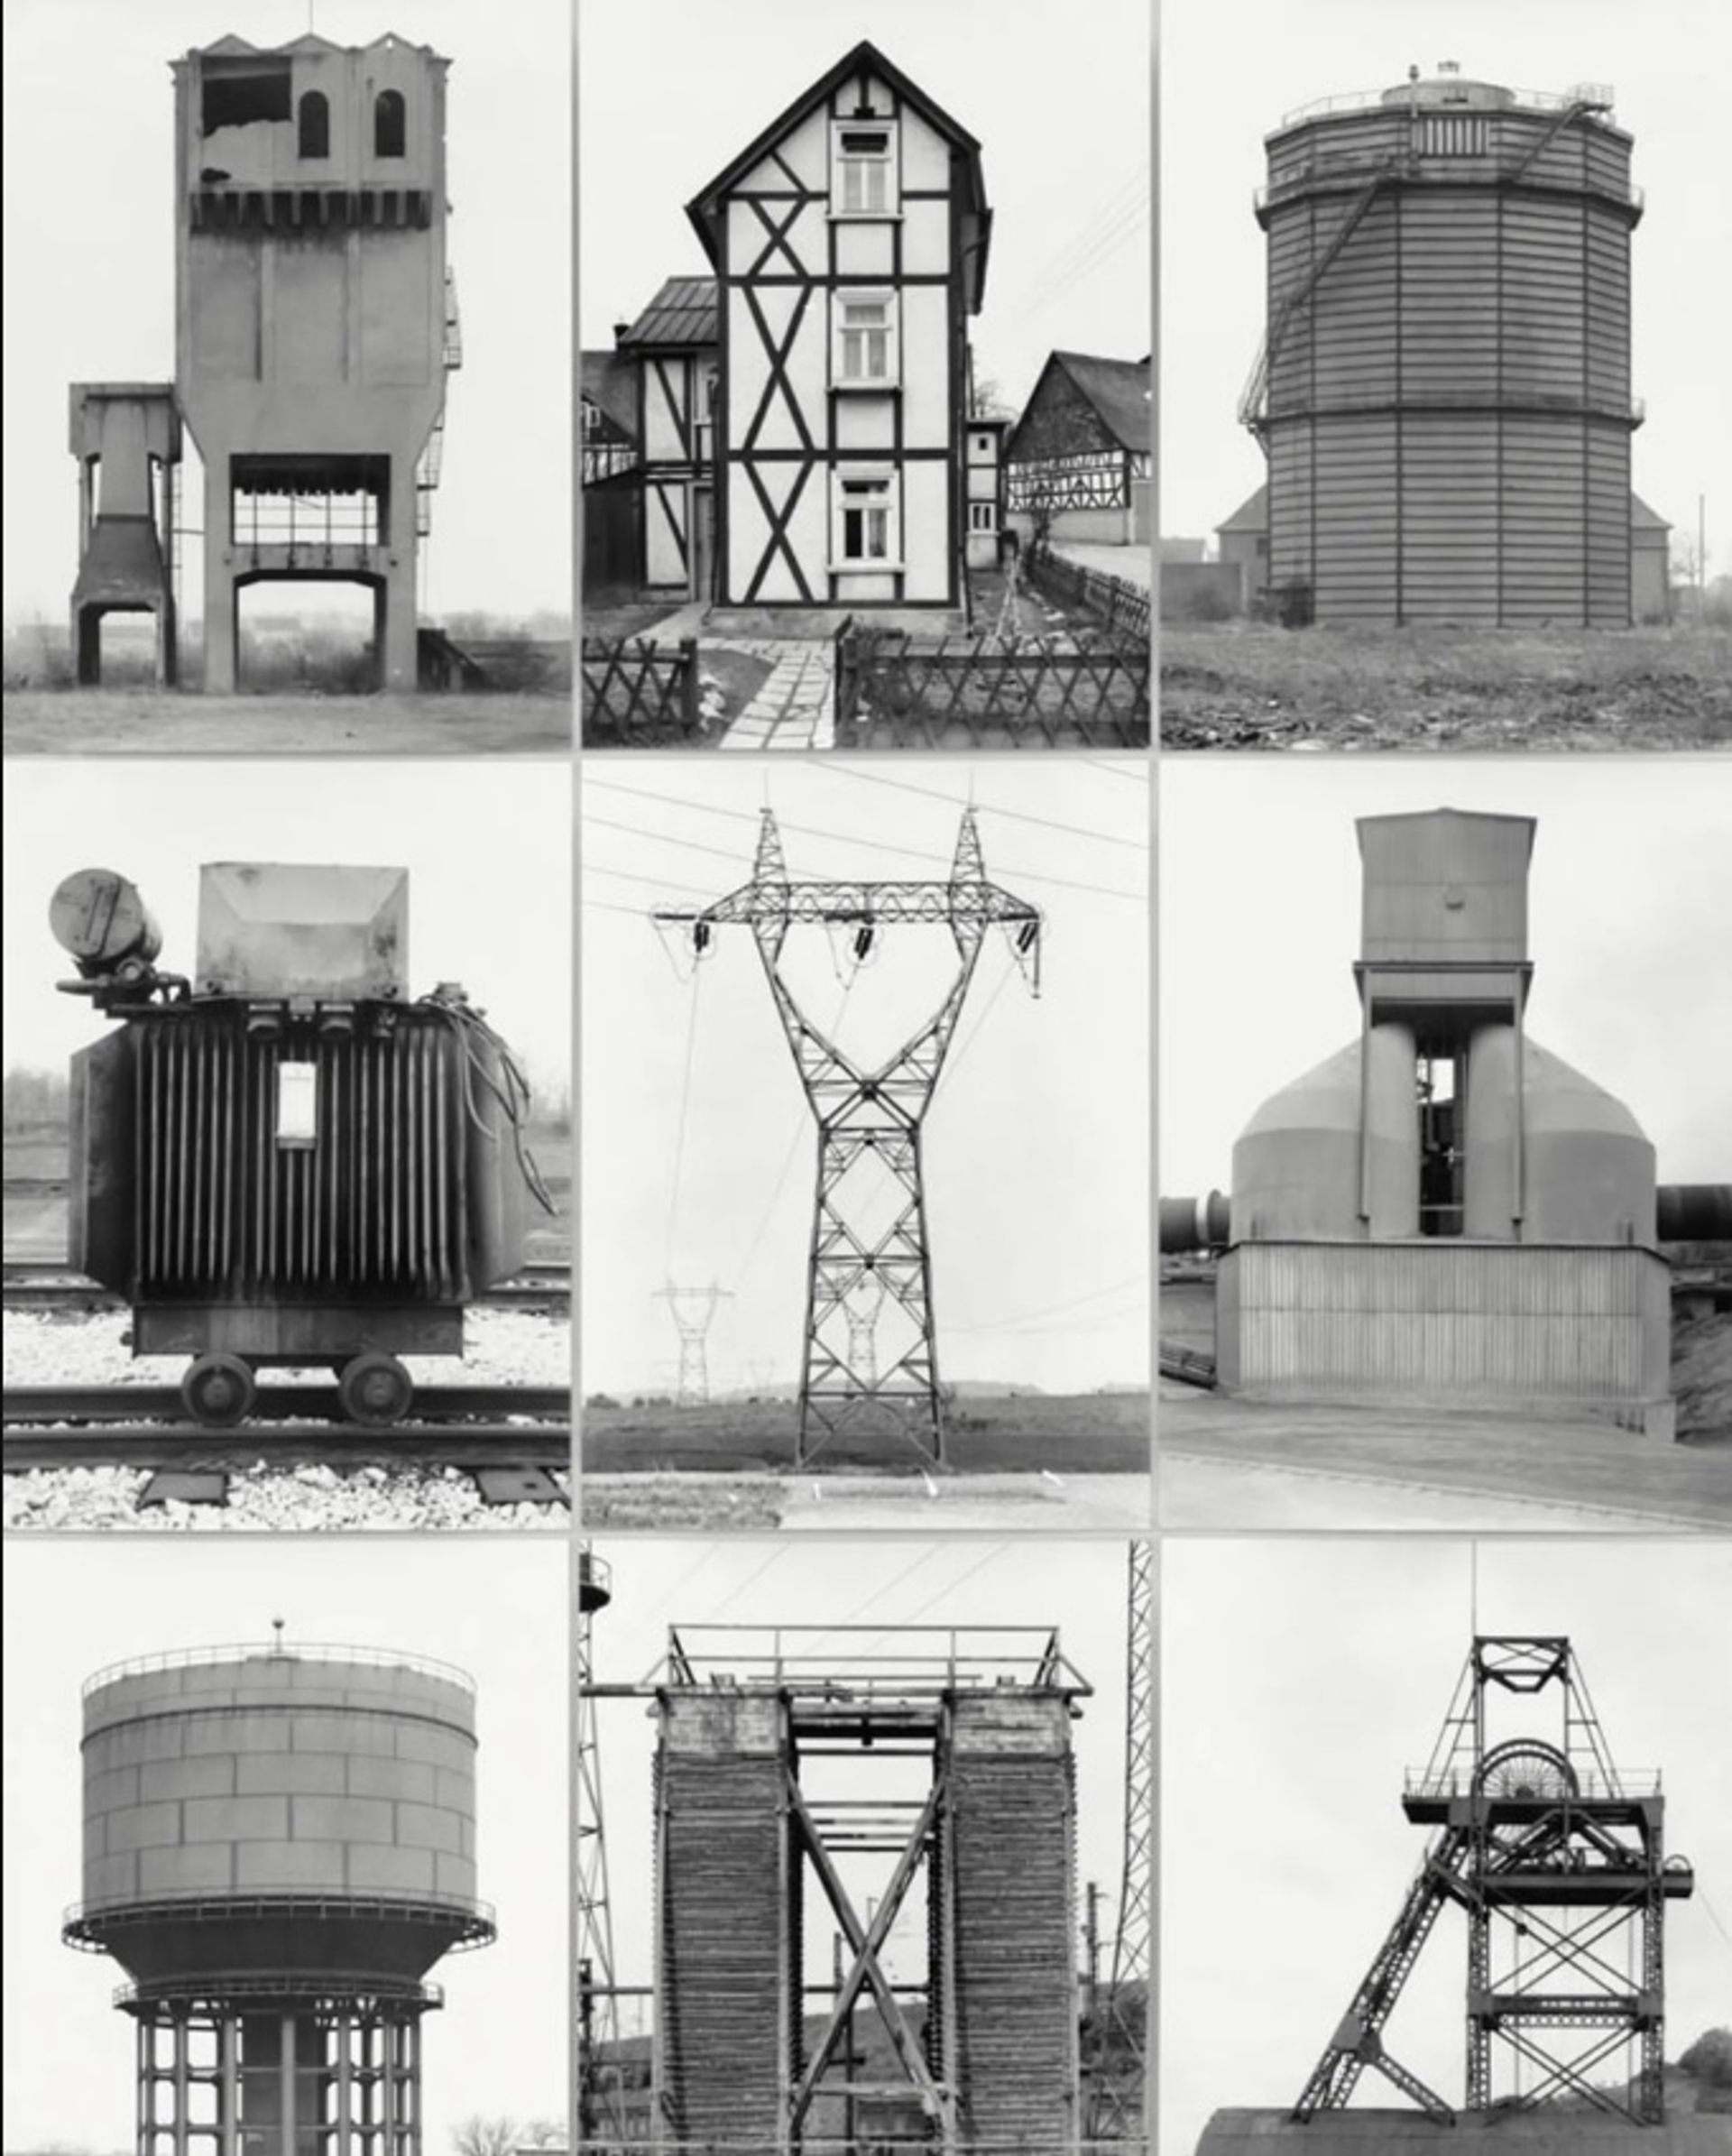 Comparative Juxtaposition, Nine Objects, Each with a Different Function (1961-72) של ברנד והילה בכר

© ברנד והילה בכר